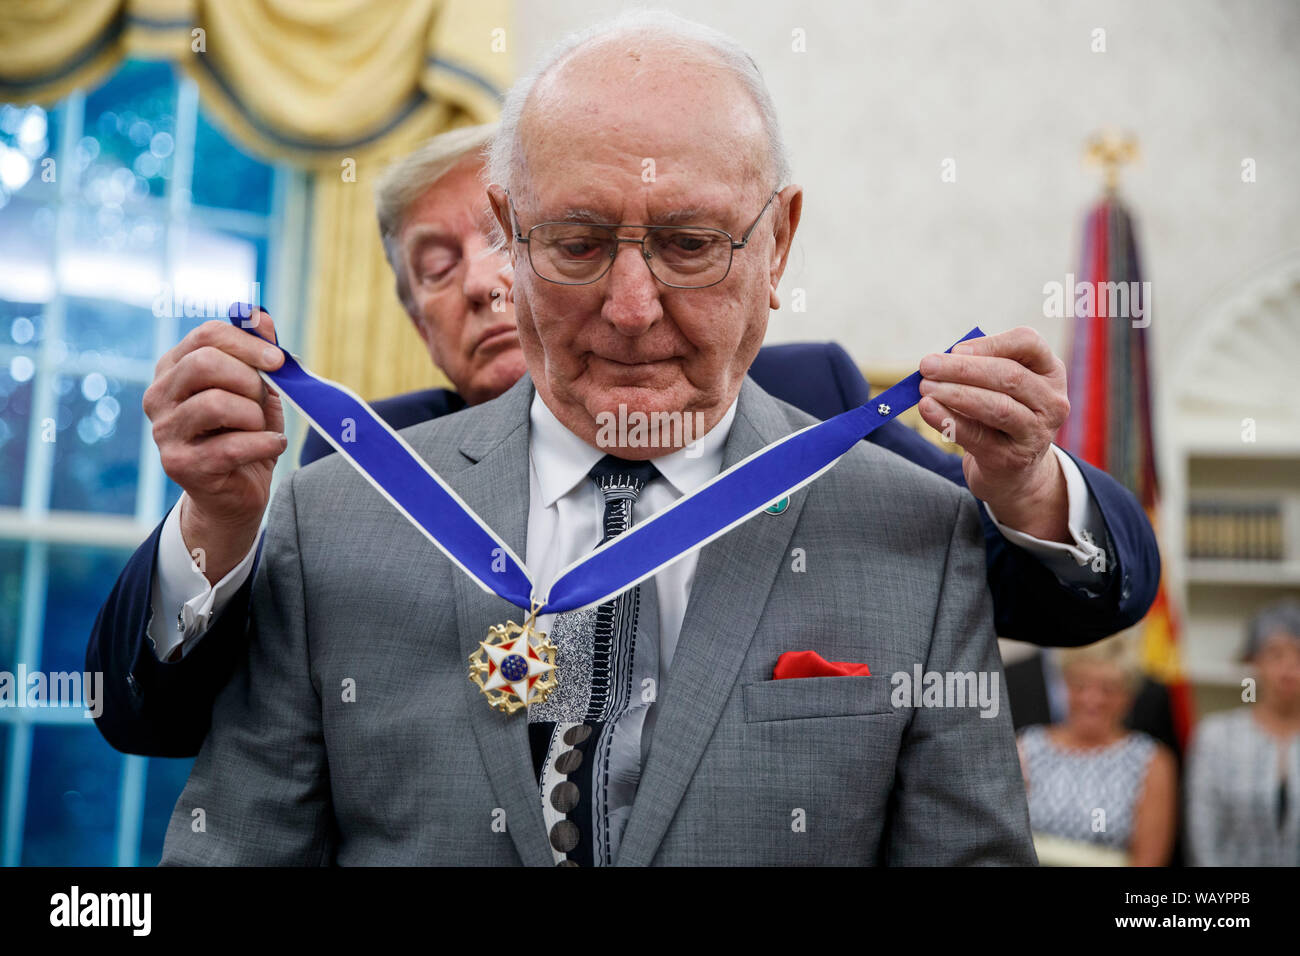 Trump awards Medal of Freedom to NBA star Bob Cousy - Los Angeles Times